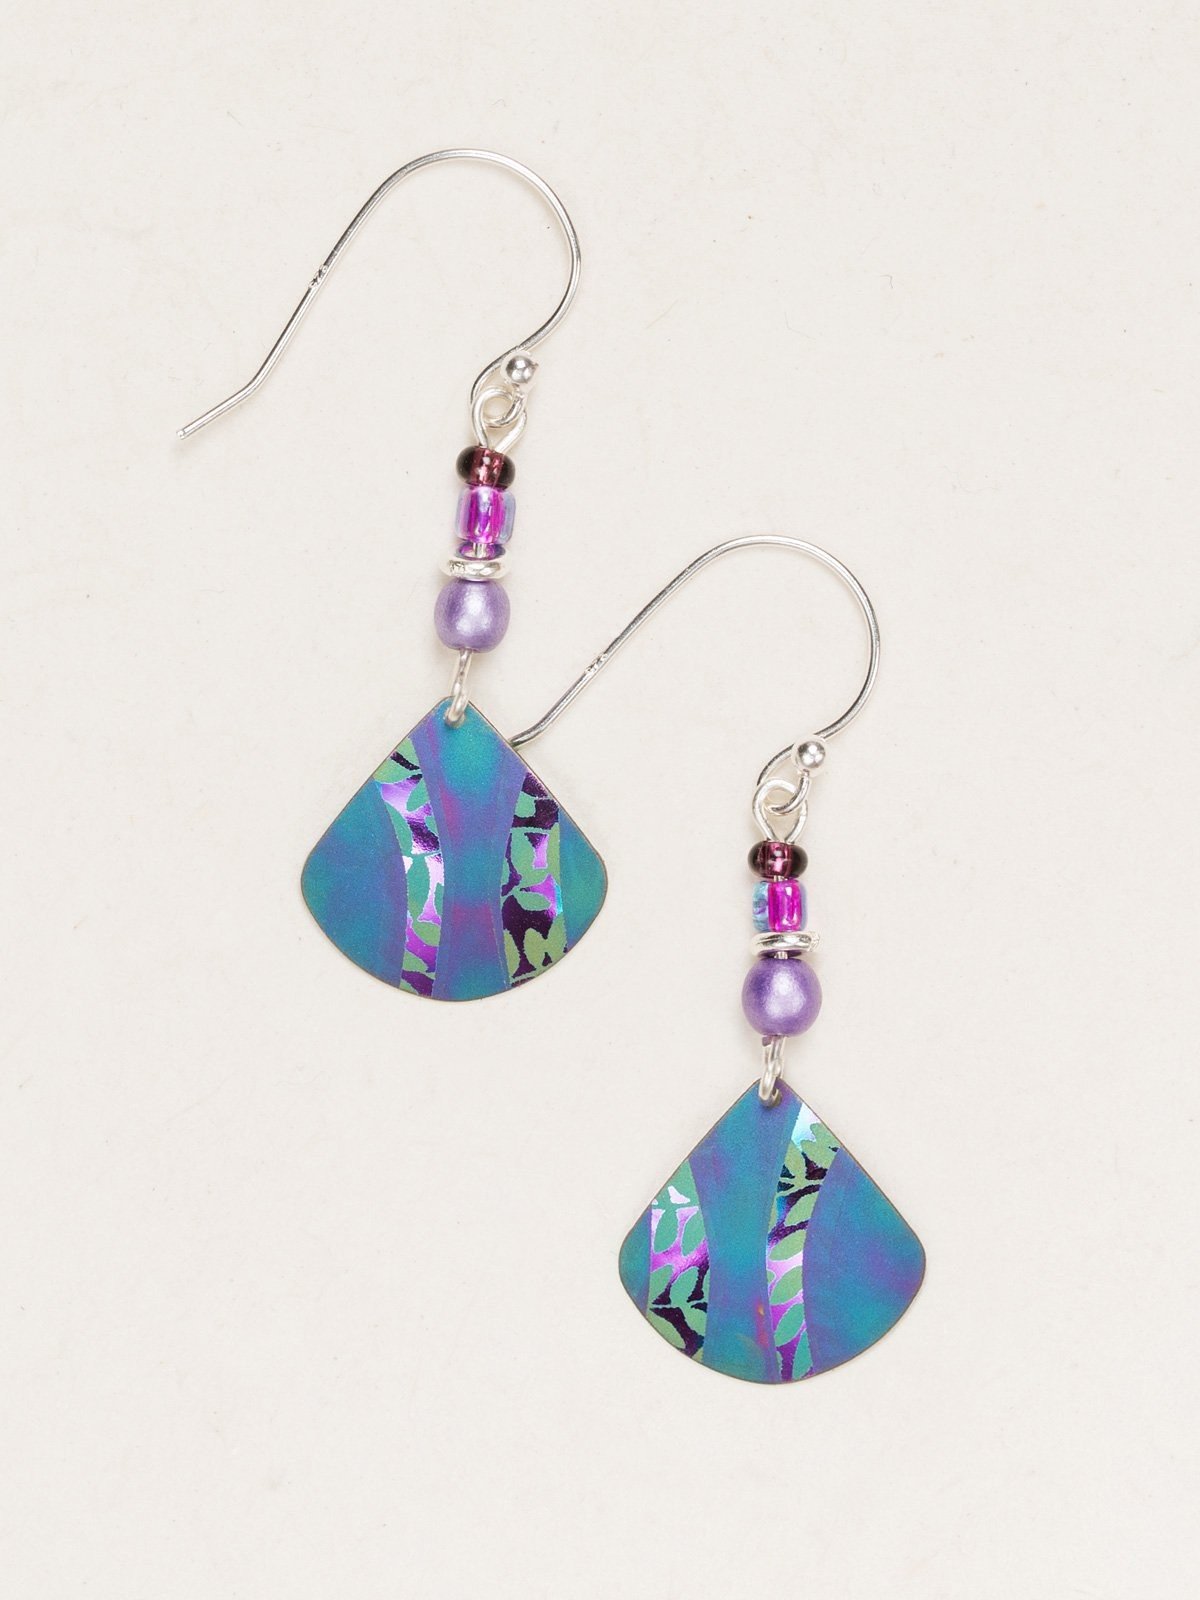 Holly Yashi Painterly earrings in teal and purple